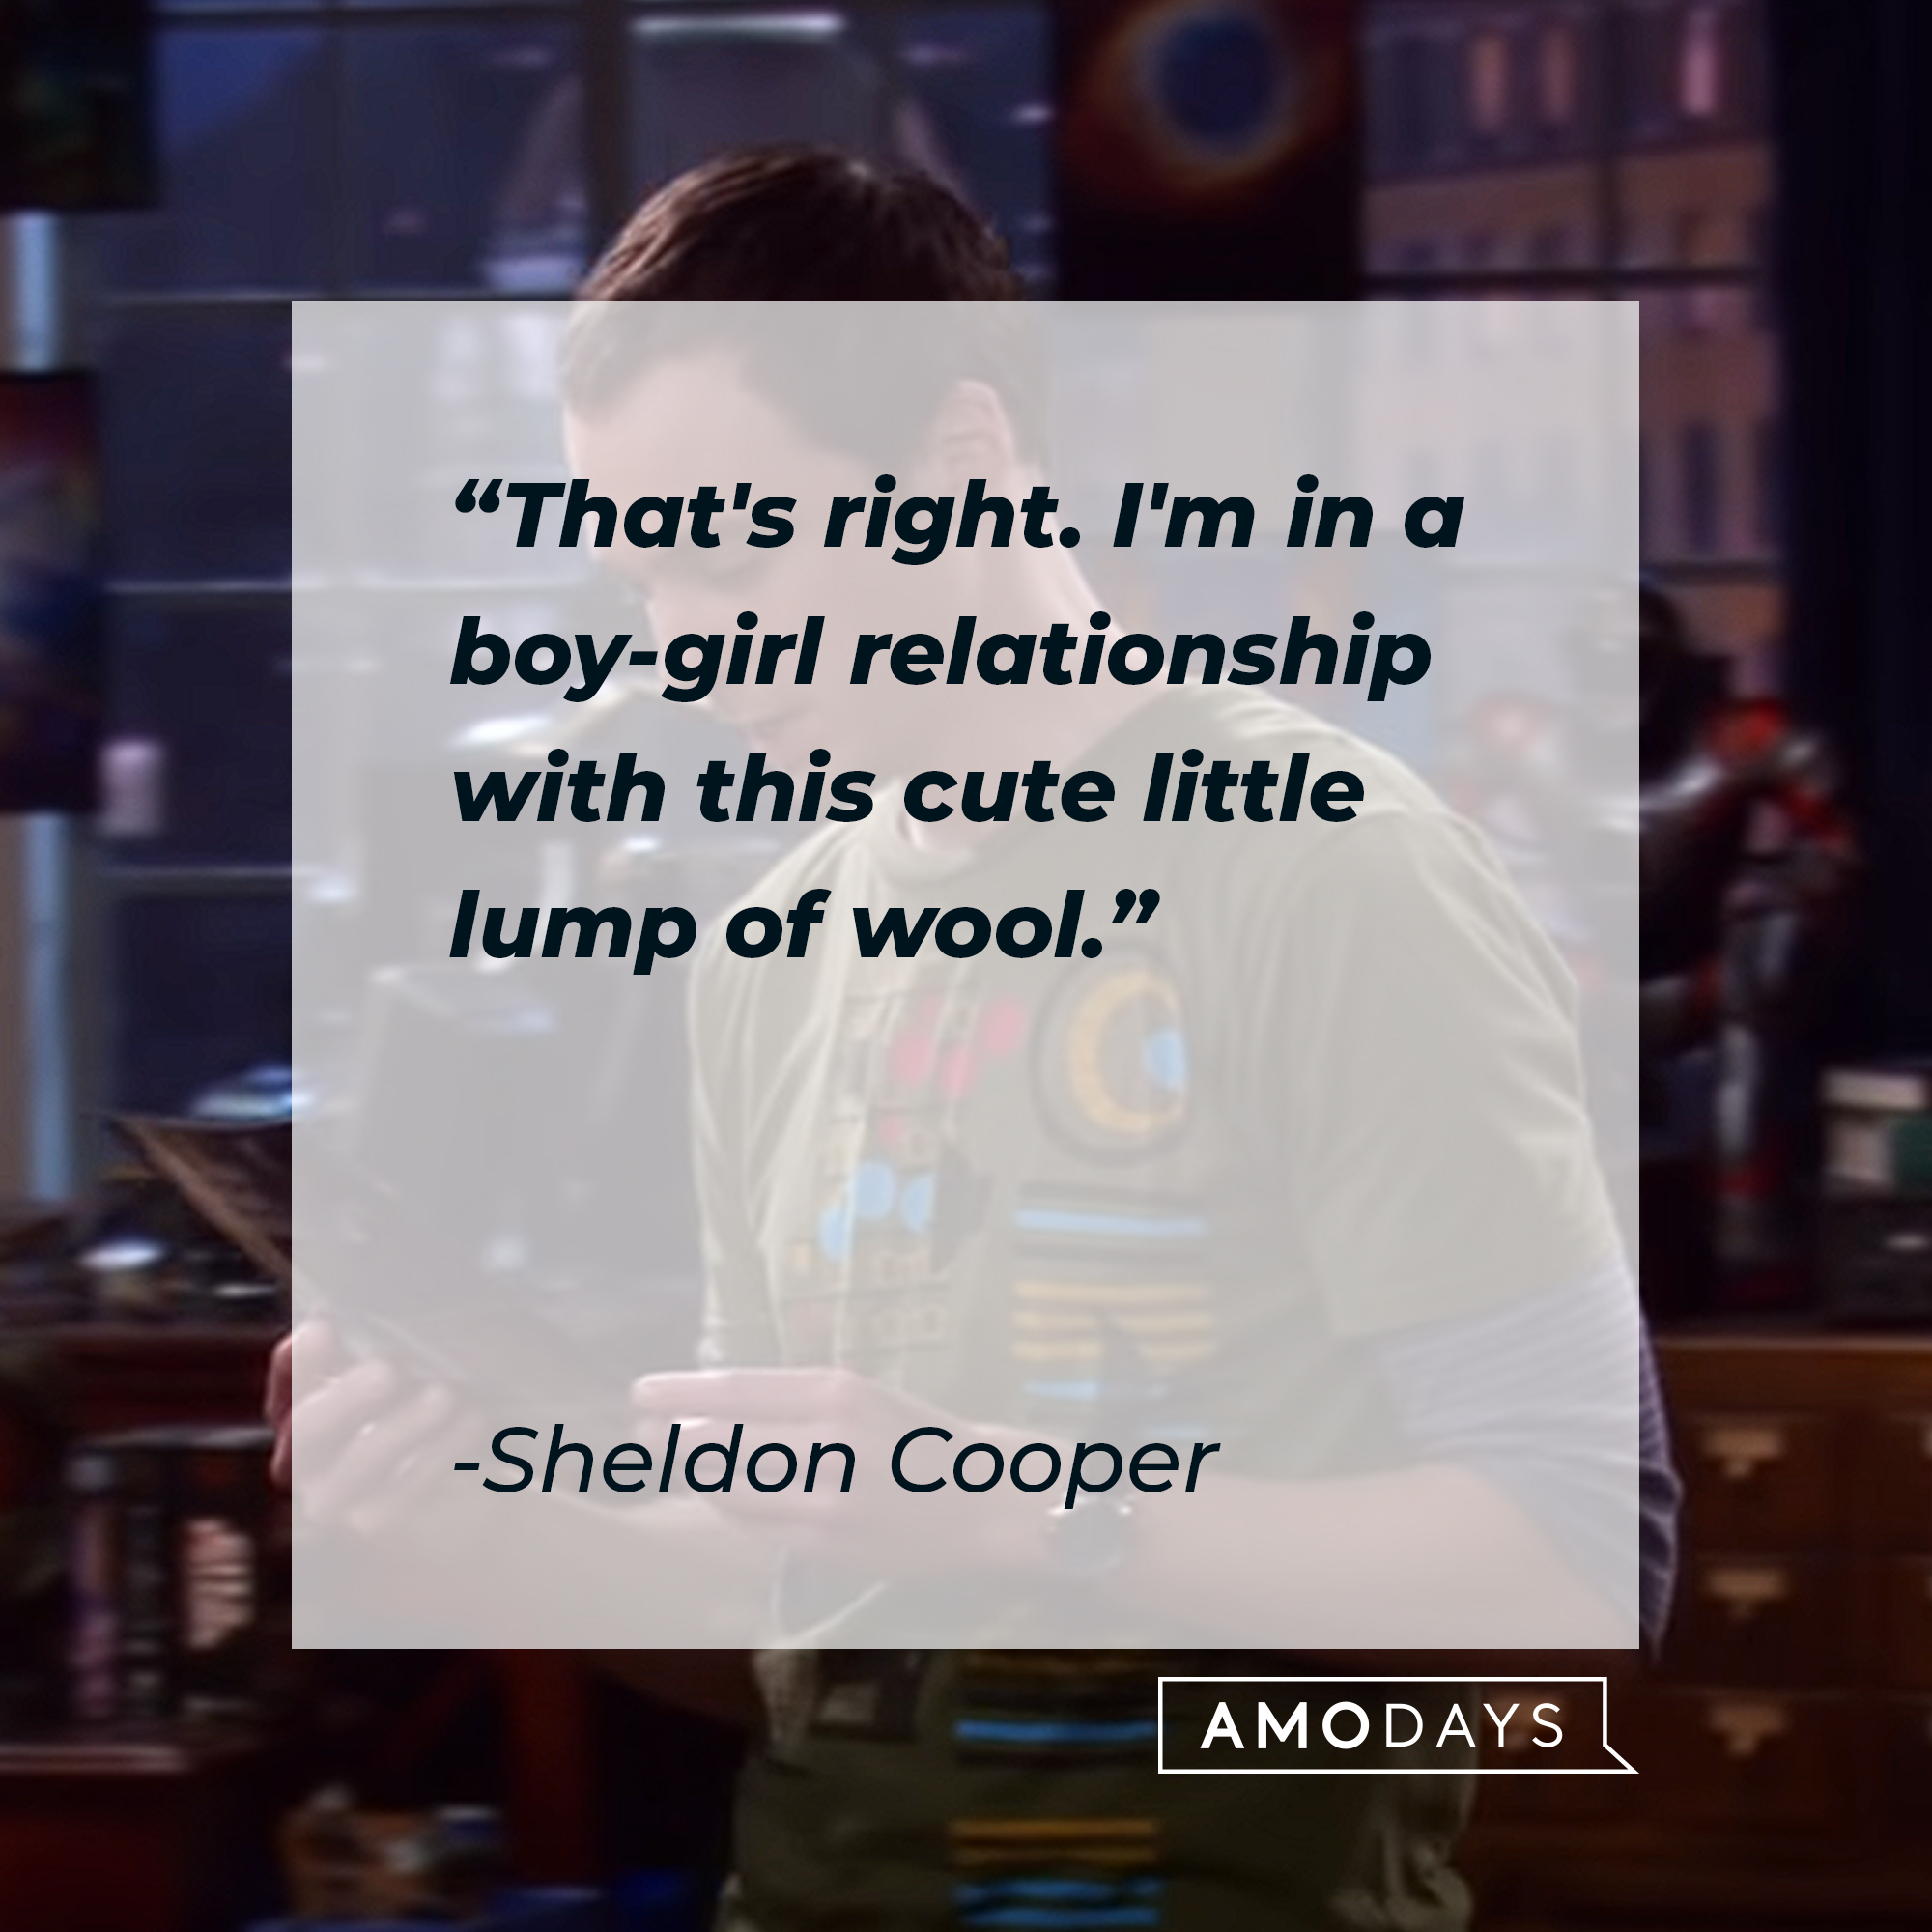 Sheldon Cooper's quote: "That's right. I'm in a boy-girl relationship with this cute little lump of wool." | Source: youtube.com/warnerbrostv